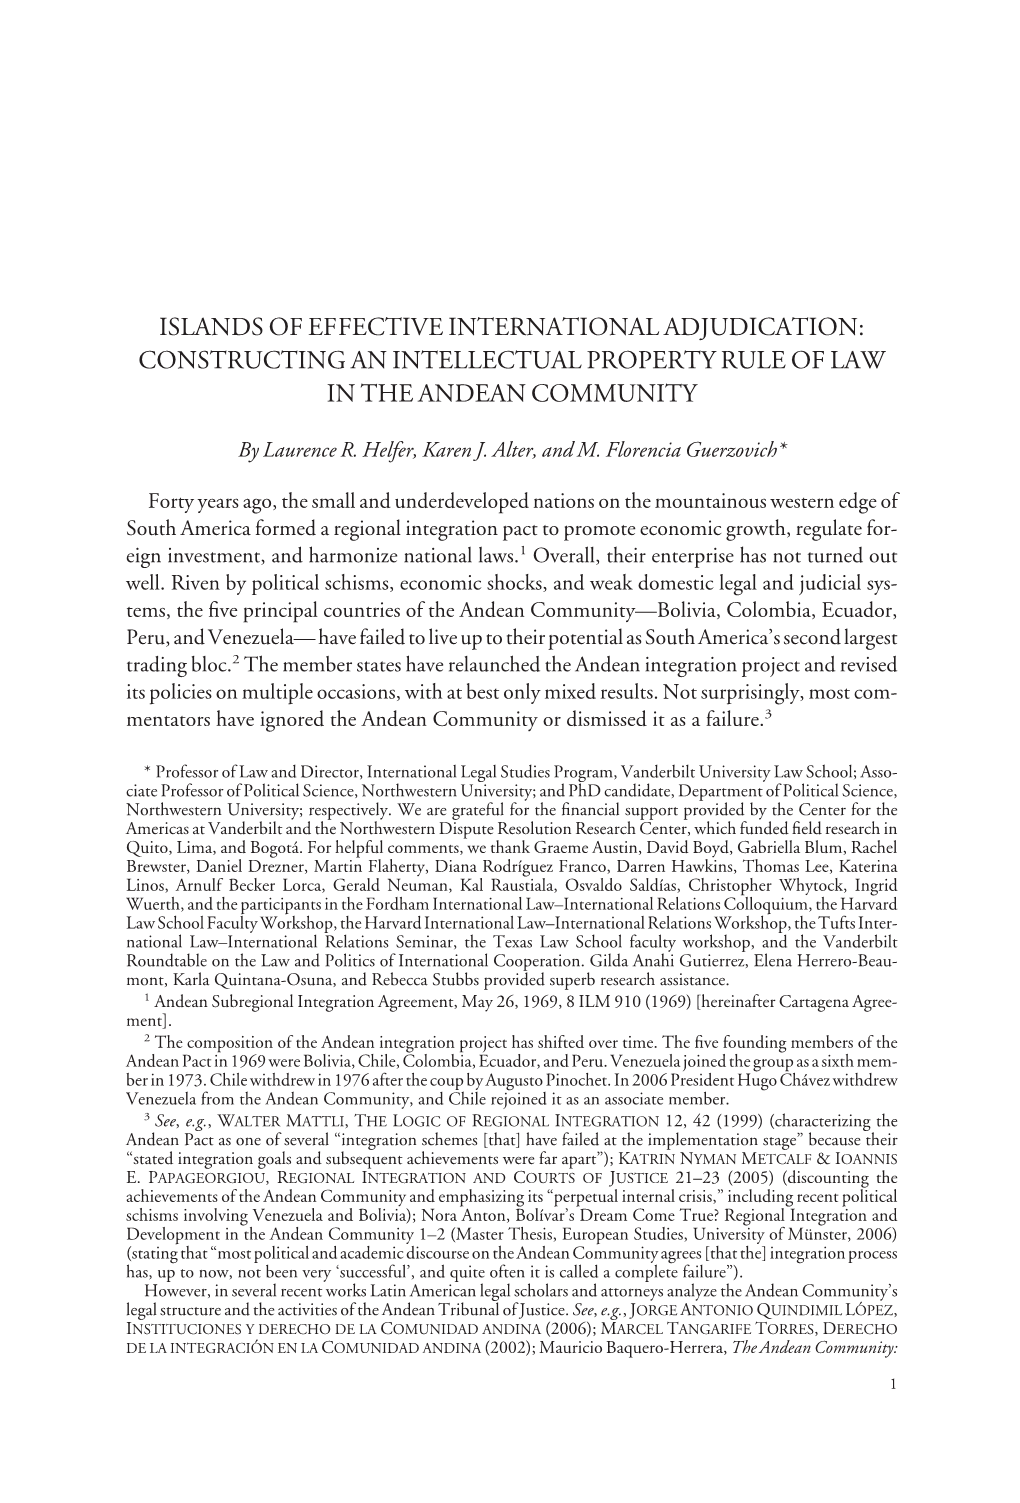 Islands of Effective International Adjudication: Constructing an Intellectual Property Rule of Law in the Andean Community